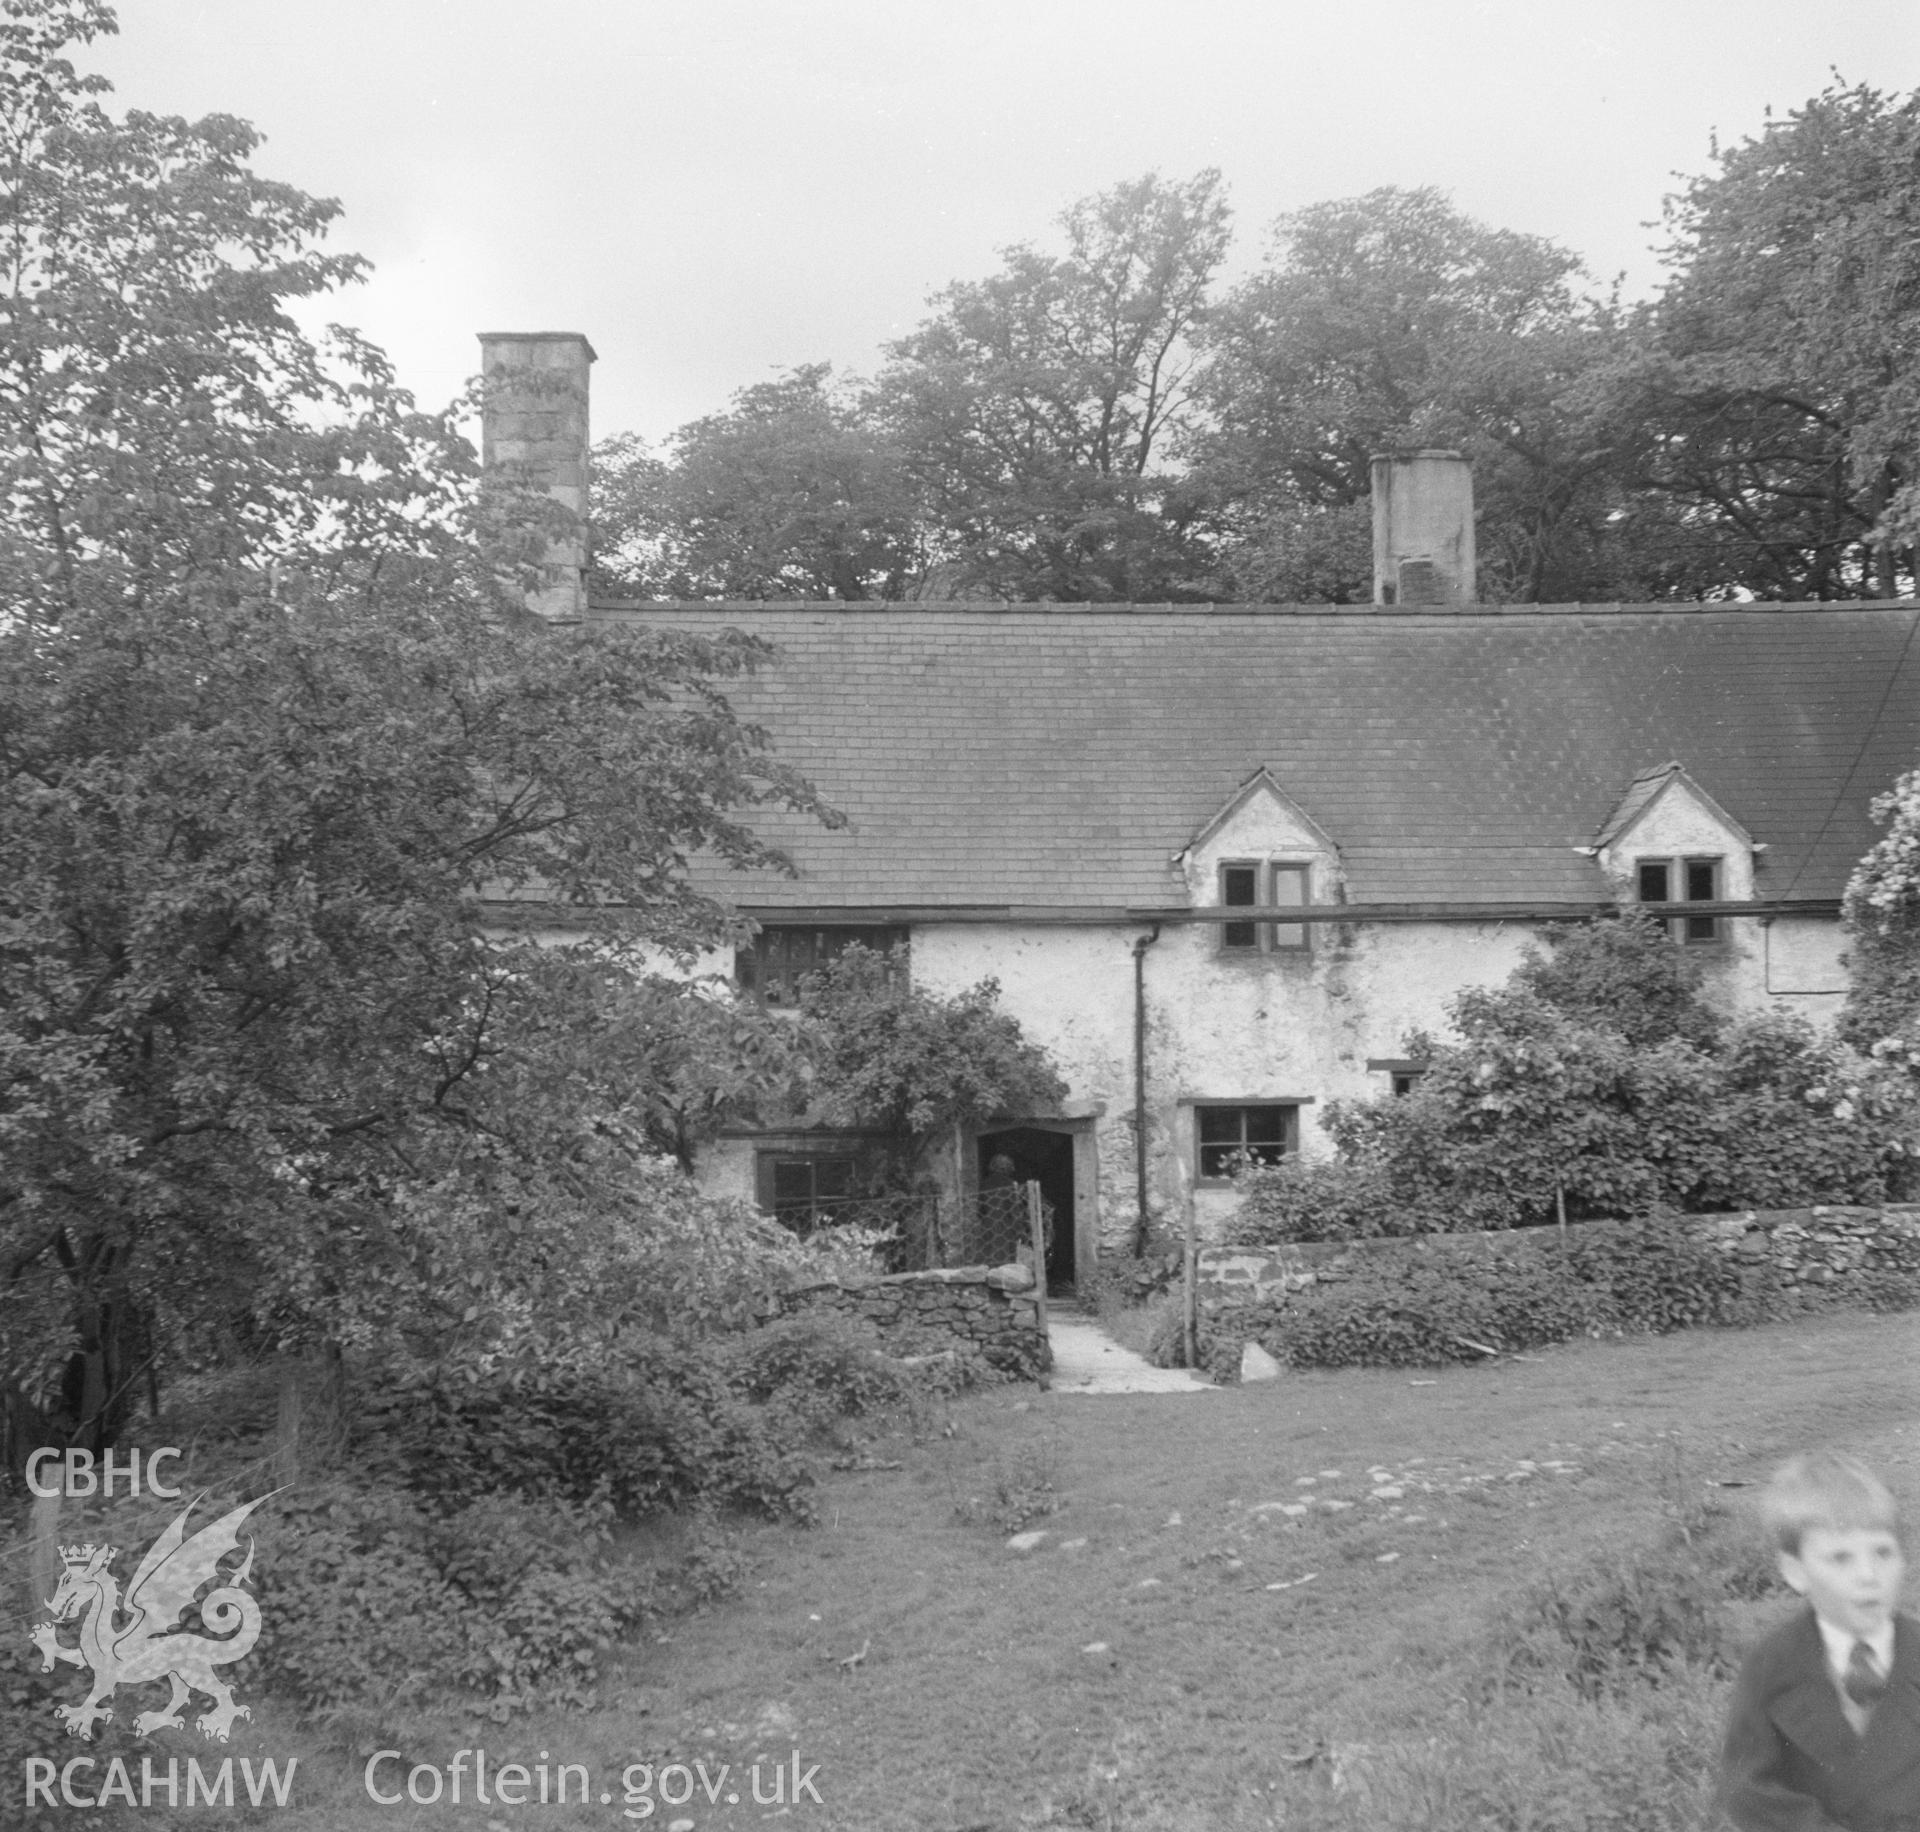 Black and white nitrate negative showing exterior view of Brithdir Mawr, Flintshire.